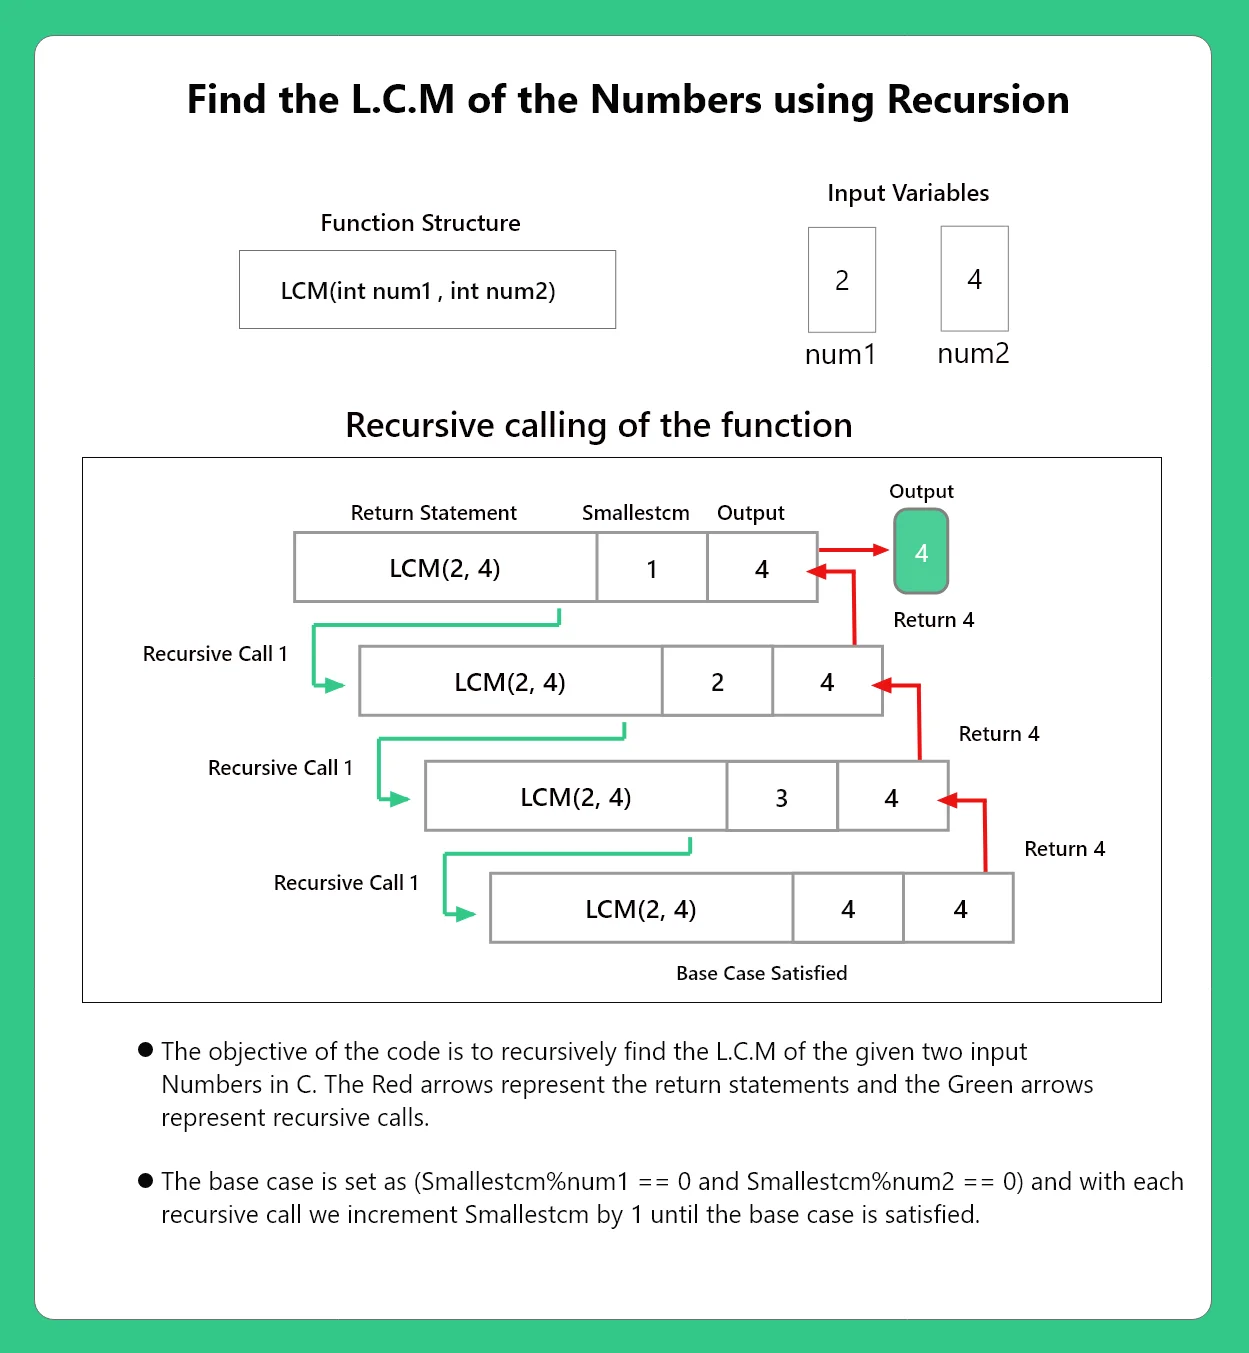 Find LCM of the Numbers using Recursion in C